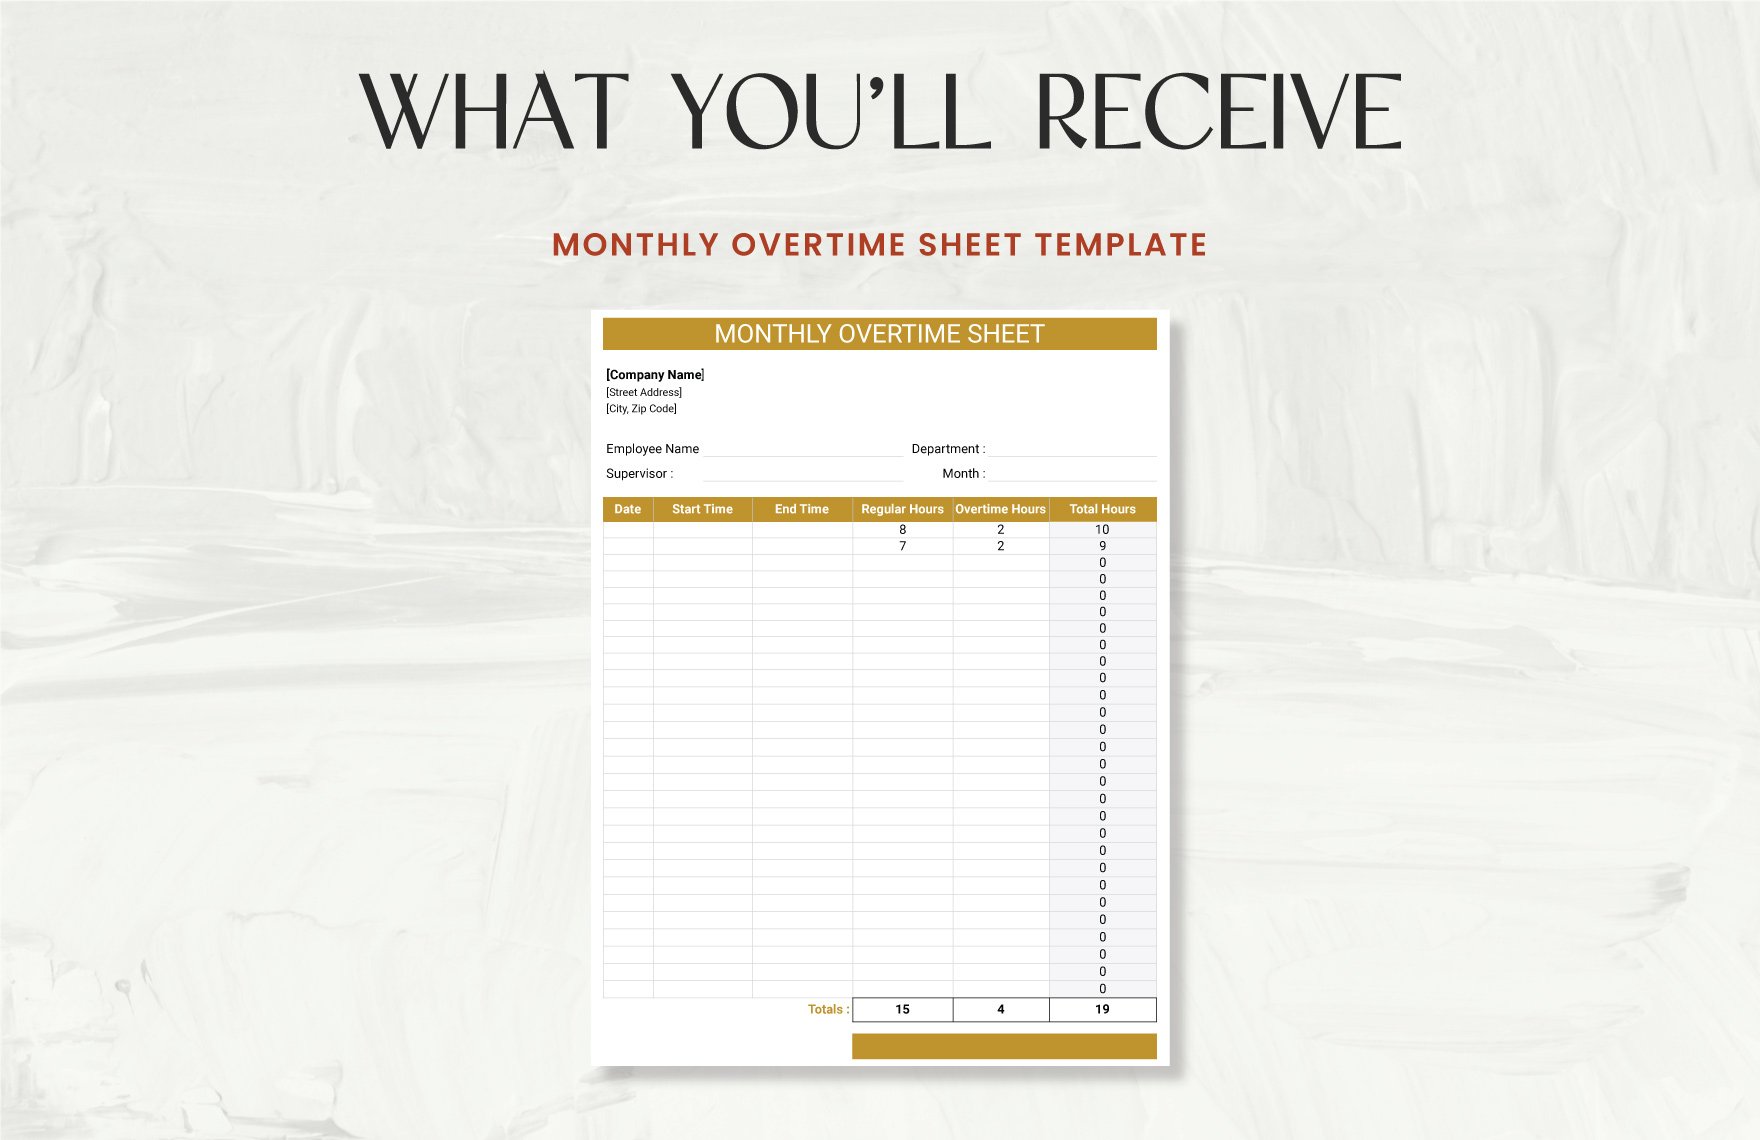 Monthly Overtime Sheet Template